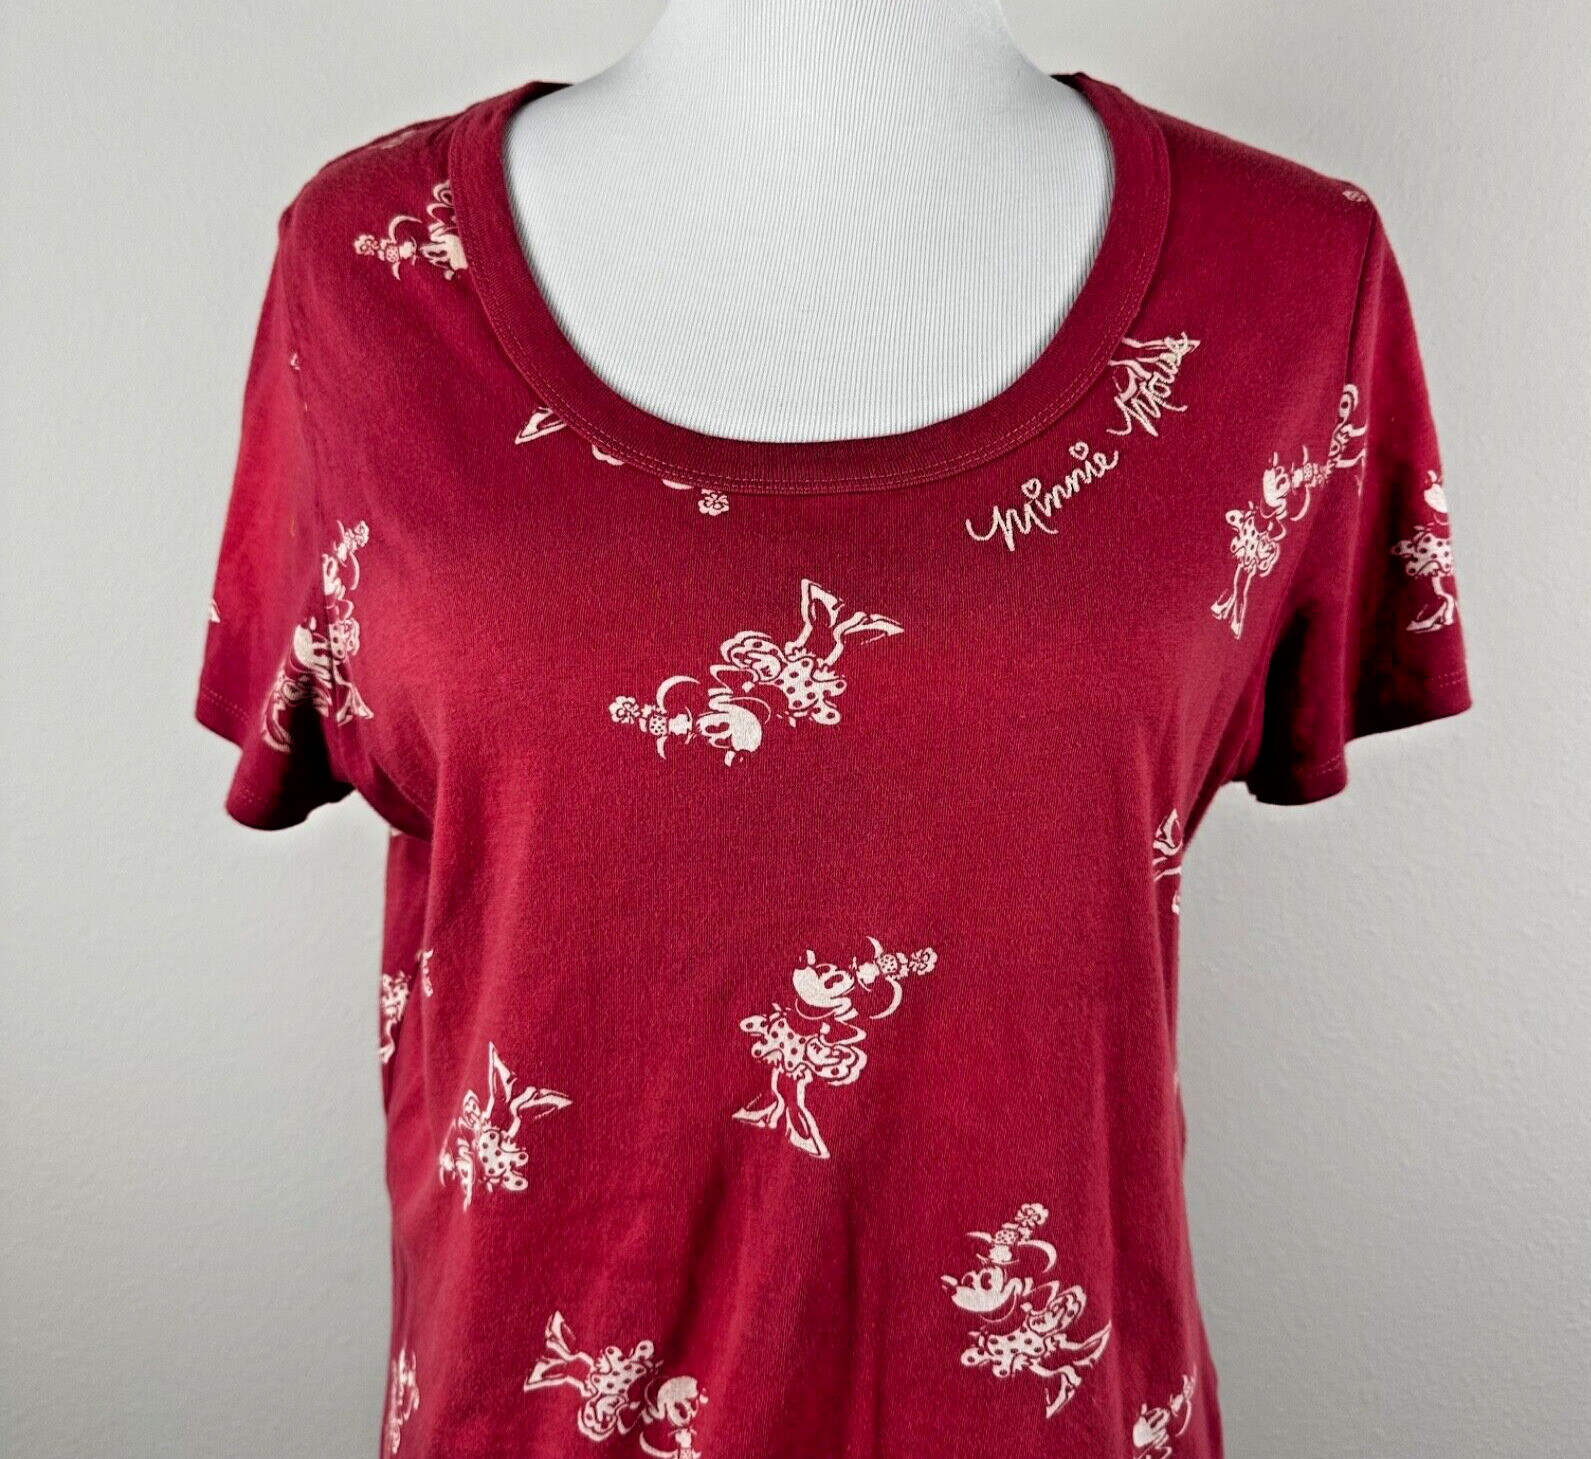 Disney Womens Top Minnie Mouse Graphics Short Sleeve Shirt Scoop Neck Red Size M